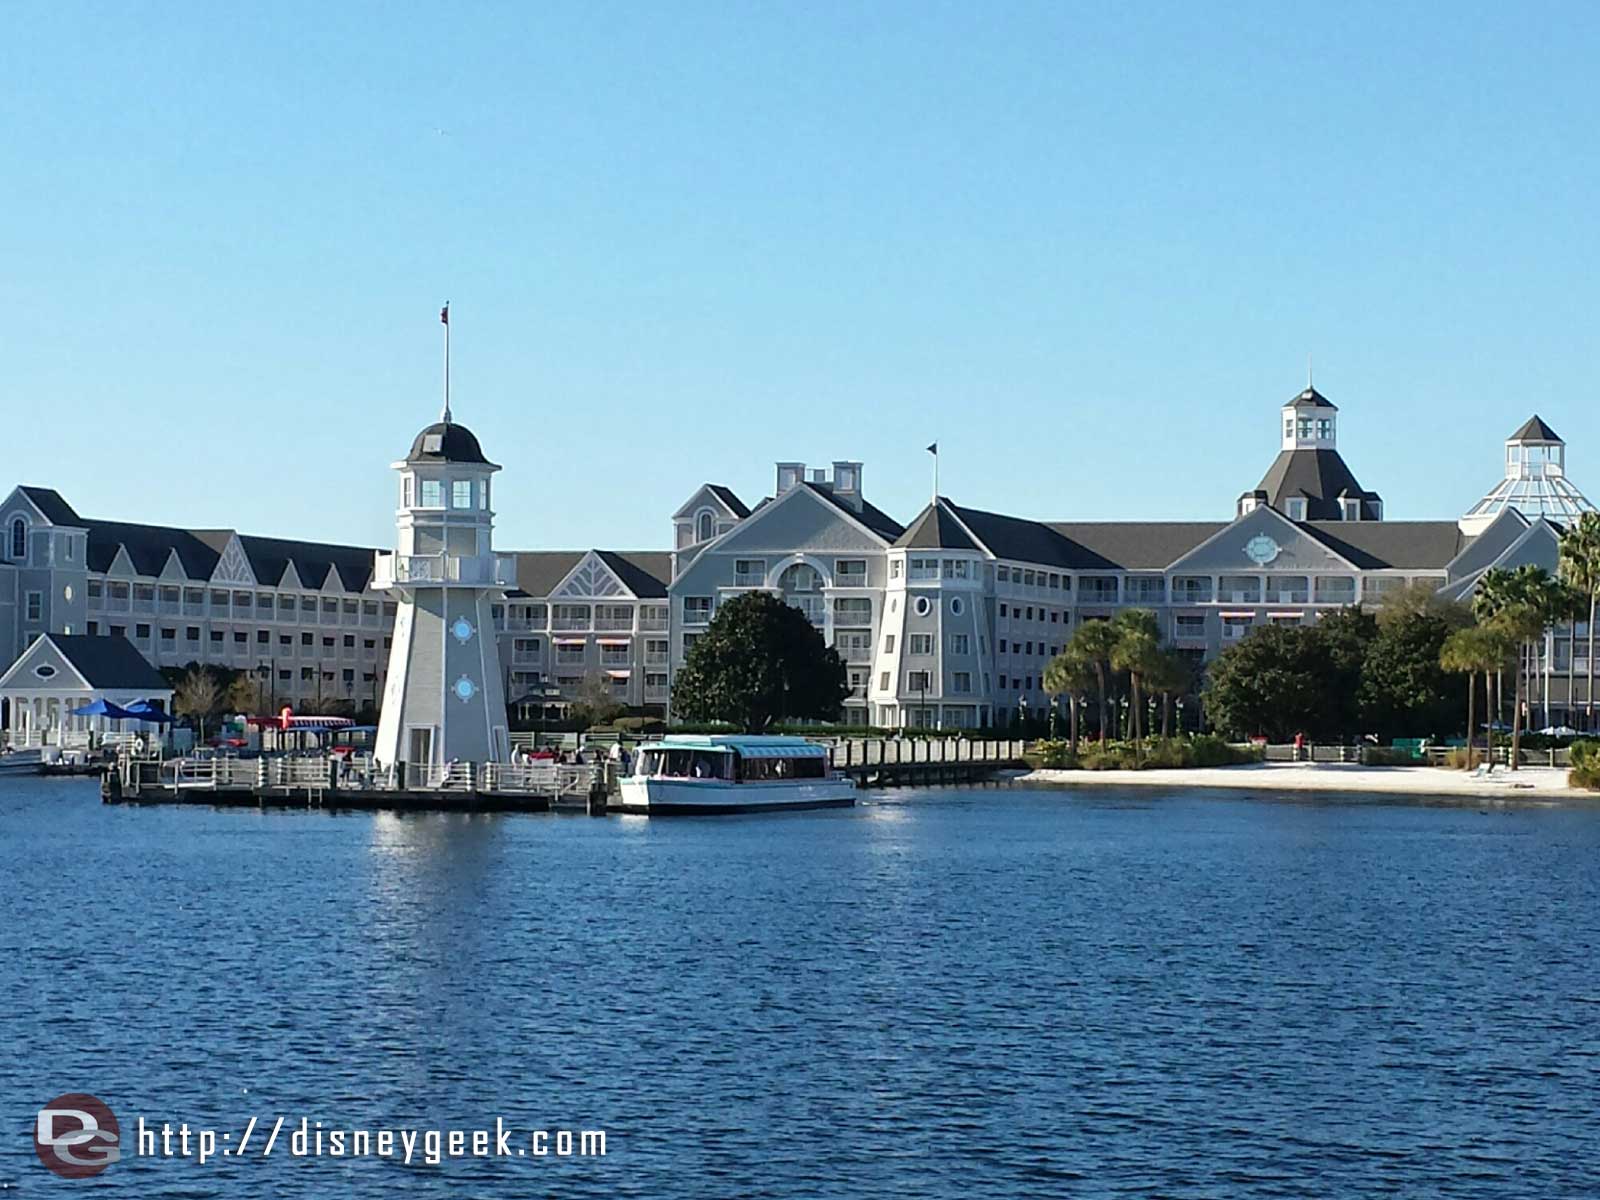 A picture perfect afternoon at Disney's Yacht Club Resort